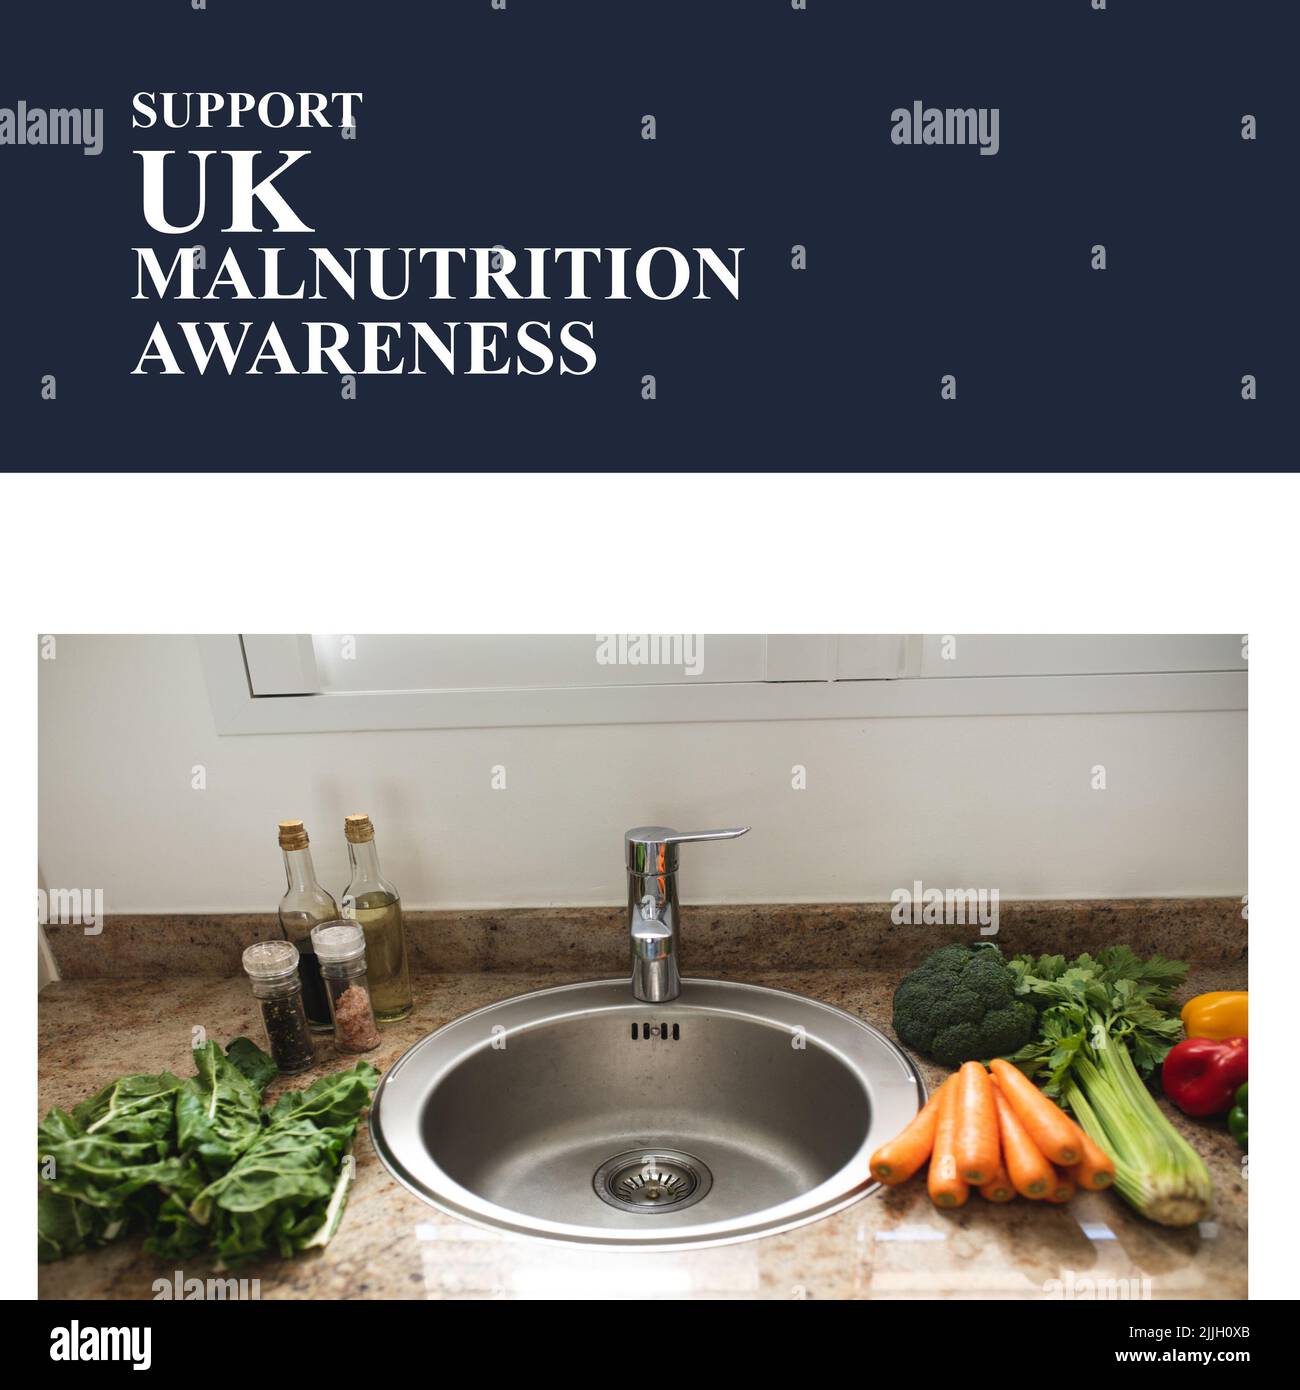 Composition of support uk malnutrition awareness text with vegetables in kitchen Stock Photo